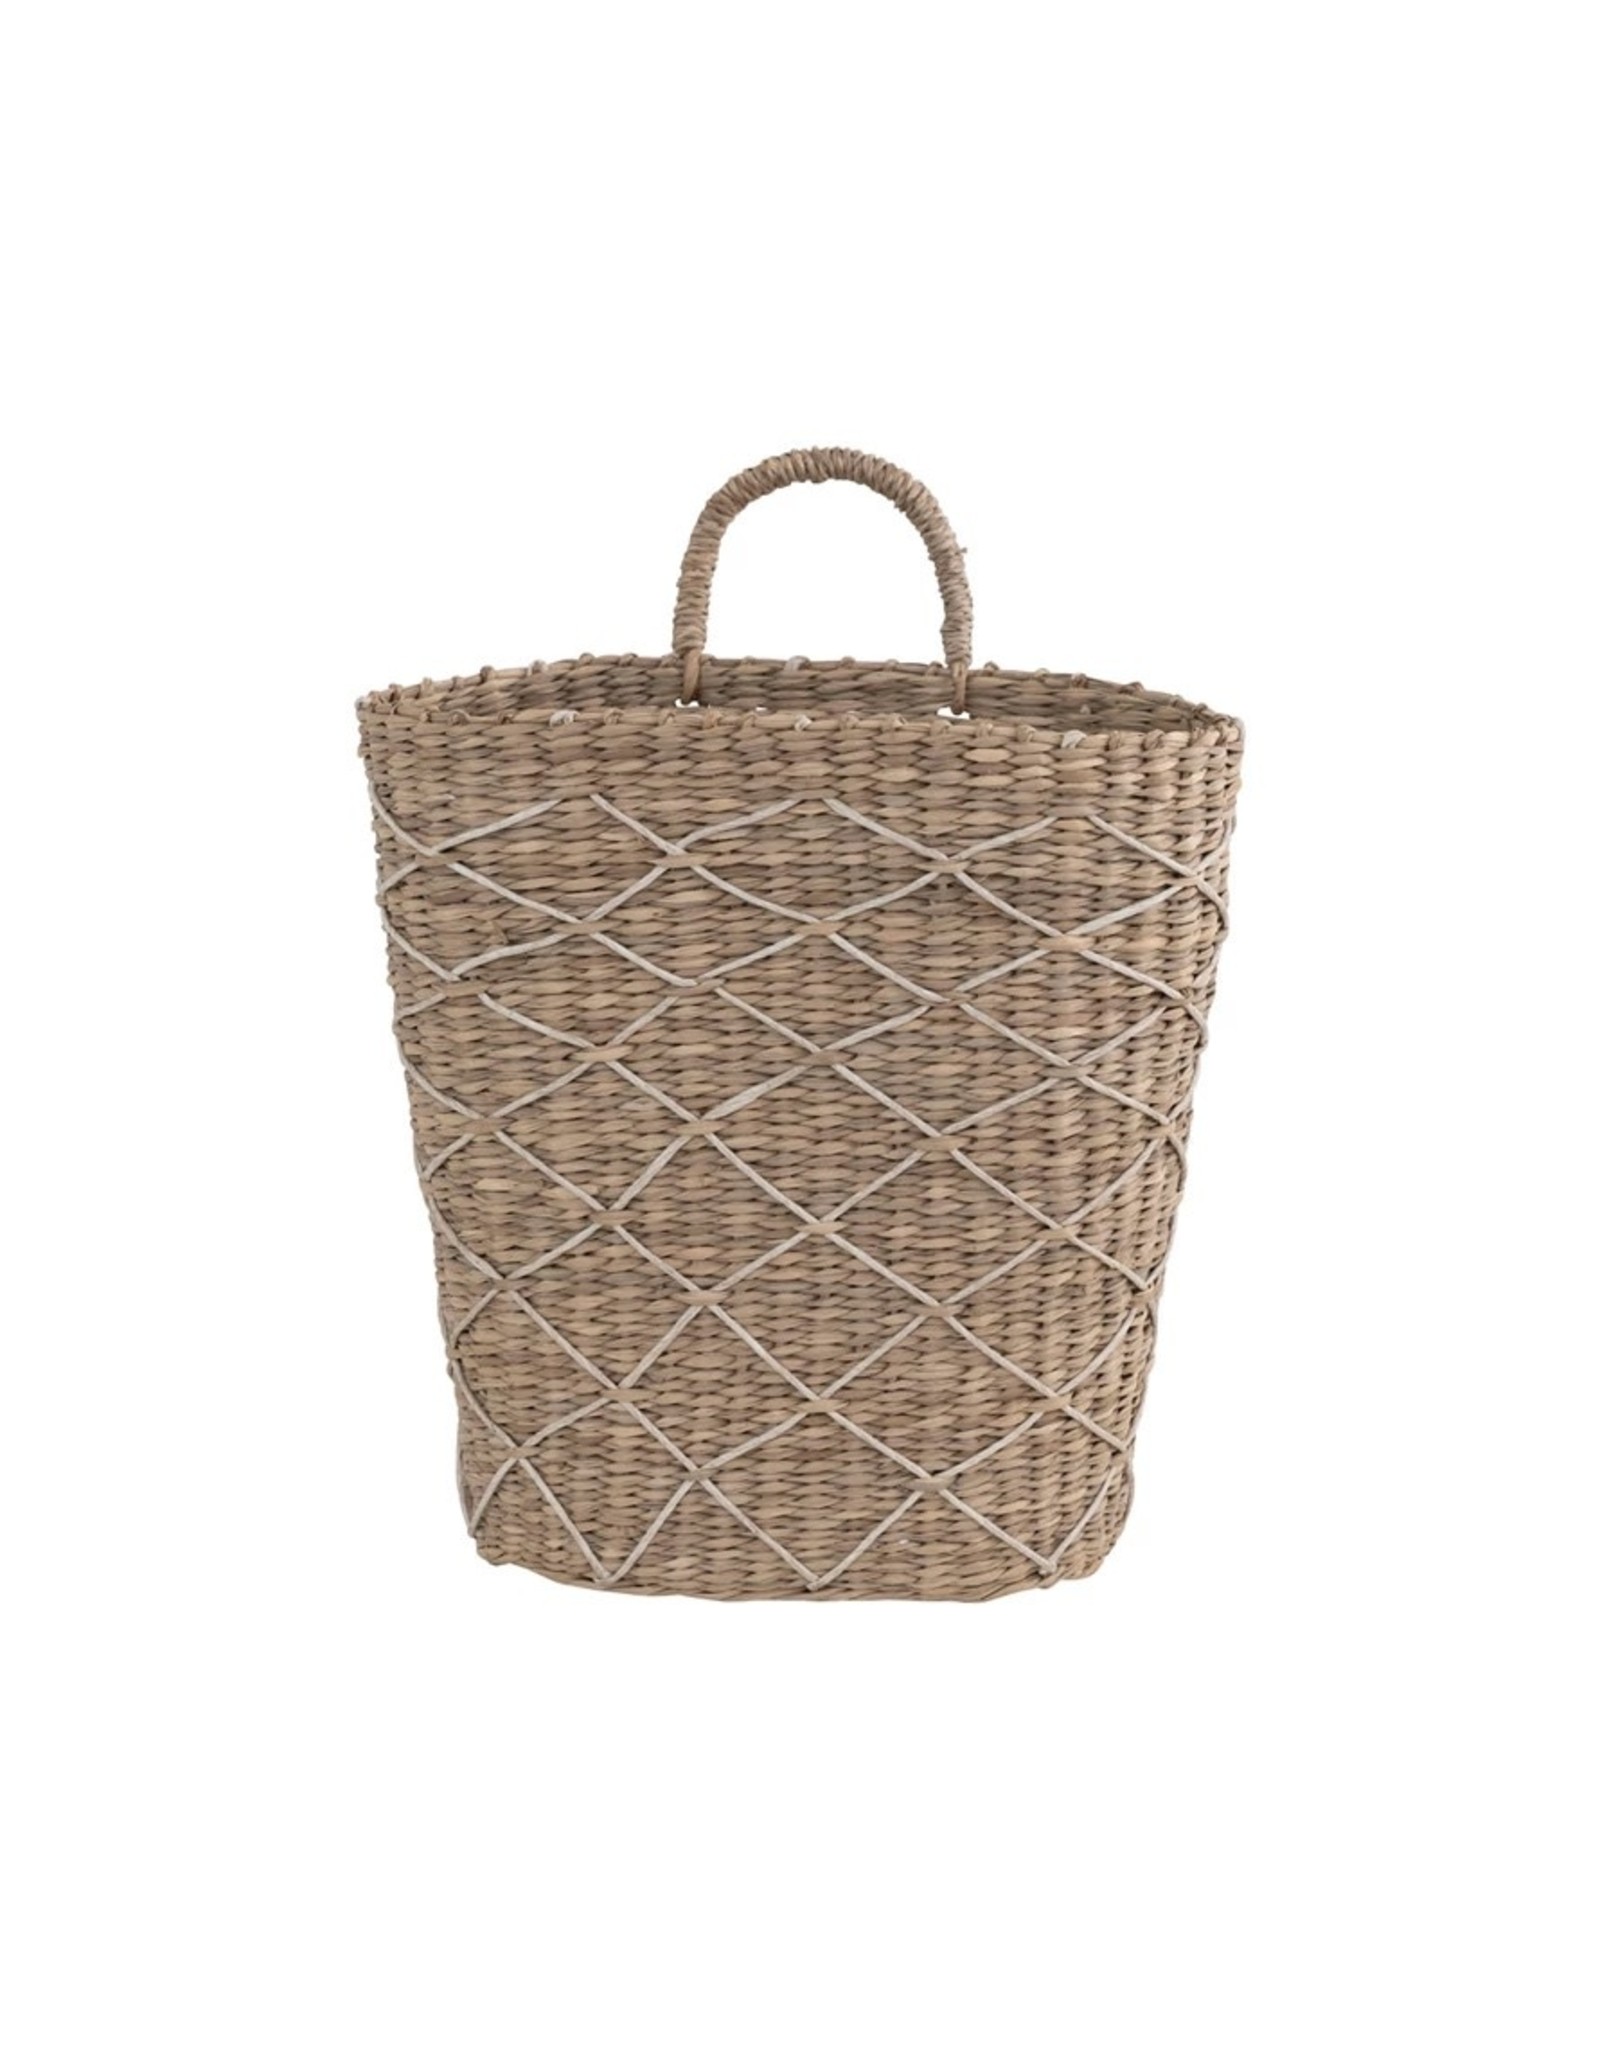 Hand-woven Seagrass Wall Basket